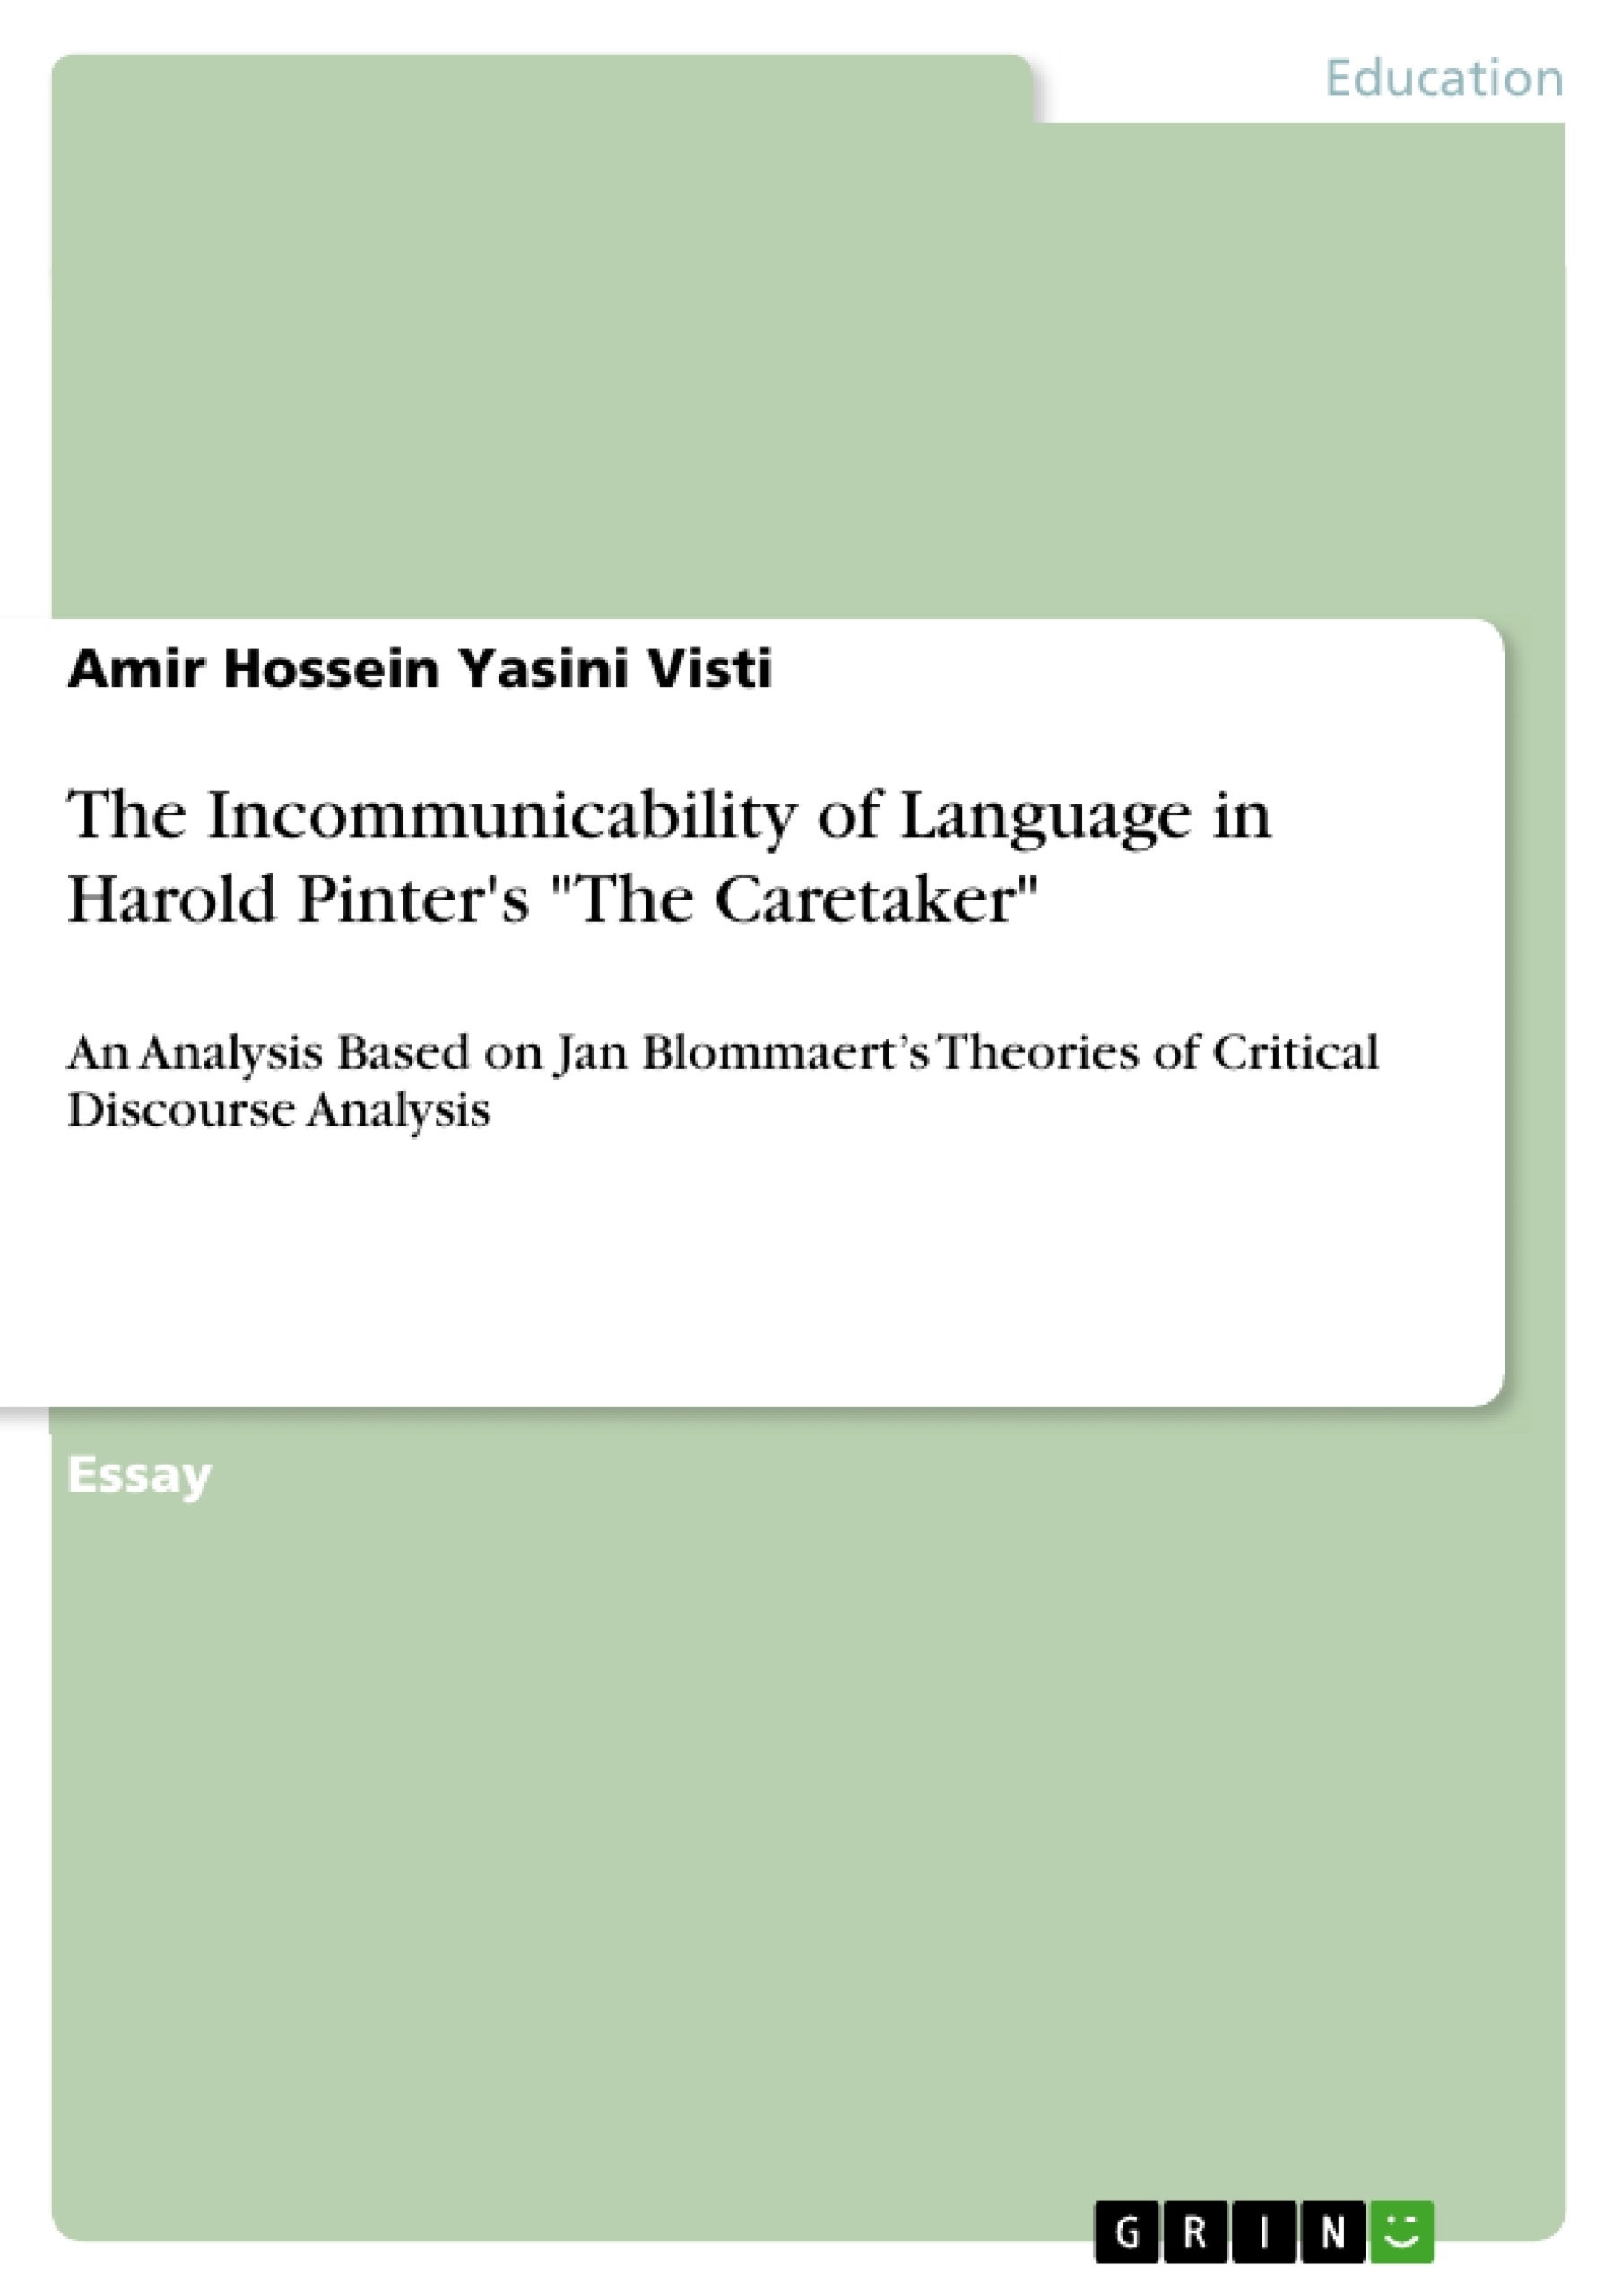 Title: The Incommunicability of Language in Harold Pinter's "The Caretaker"